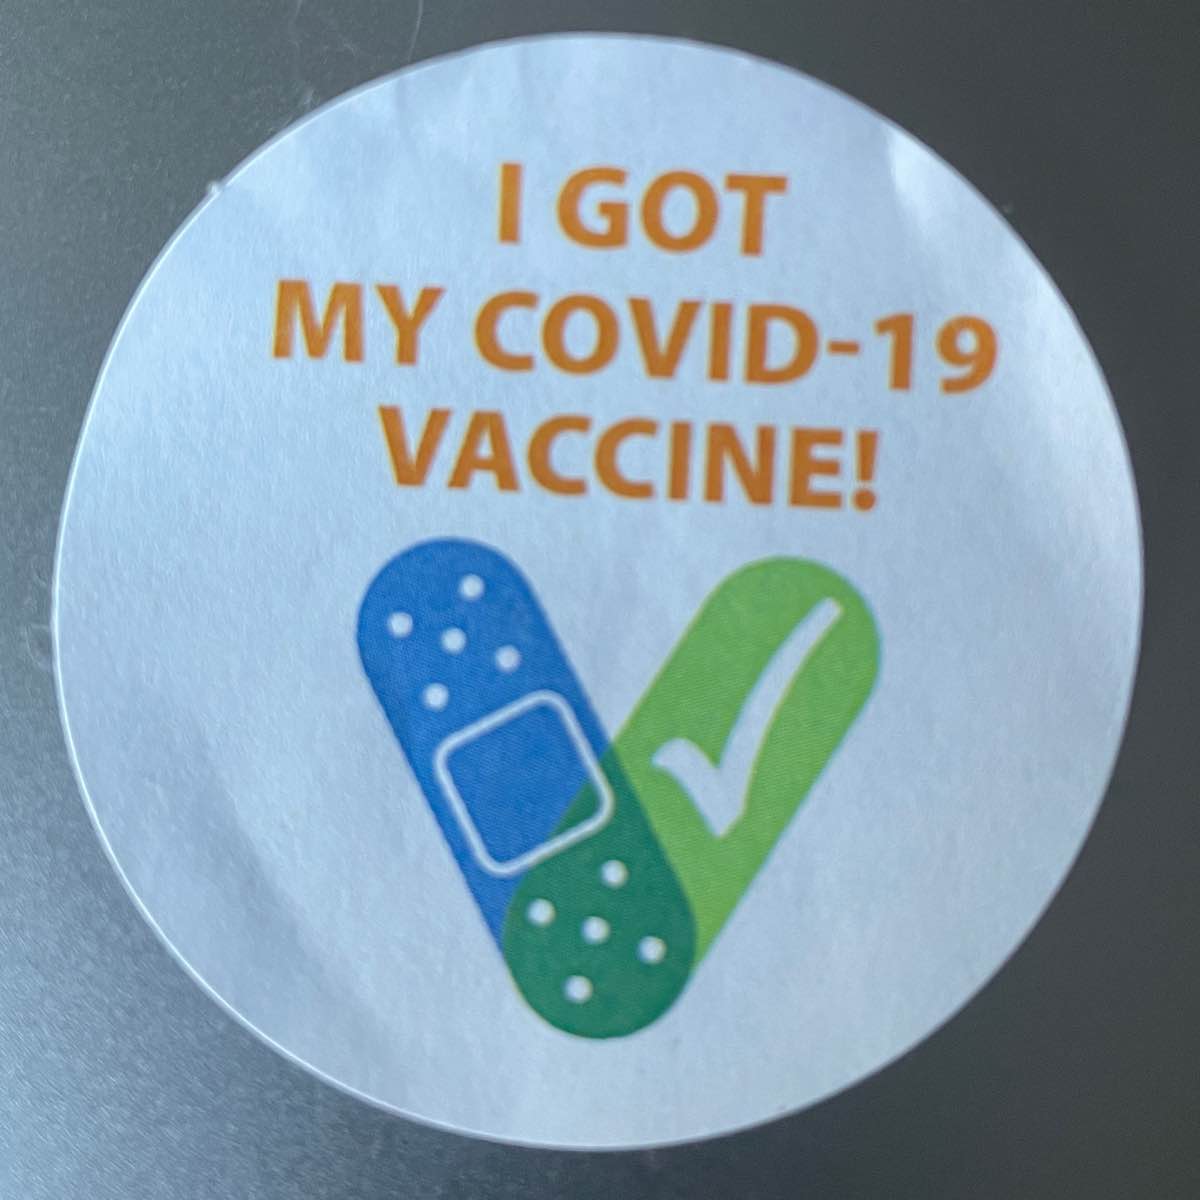 A sticker that says I got vaccined